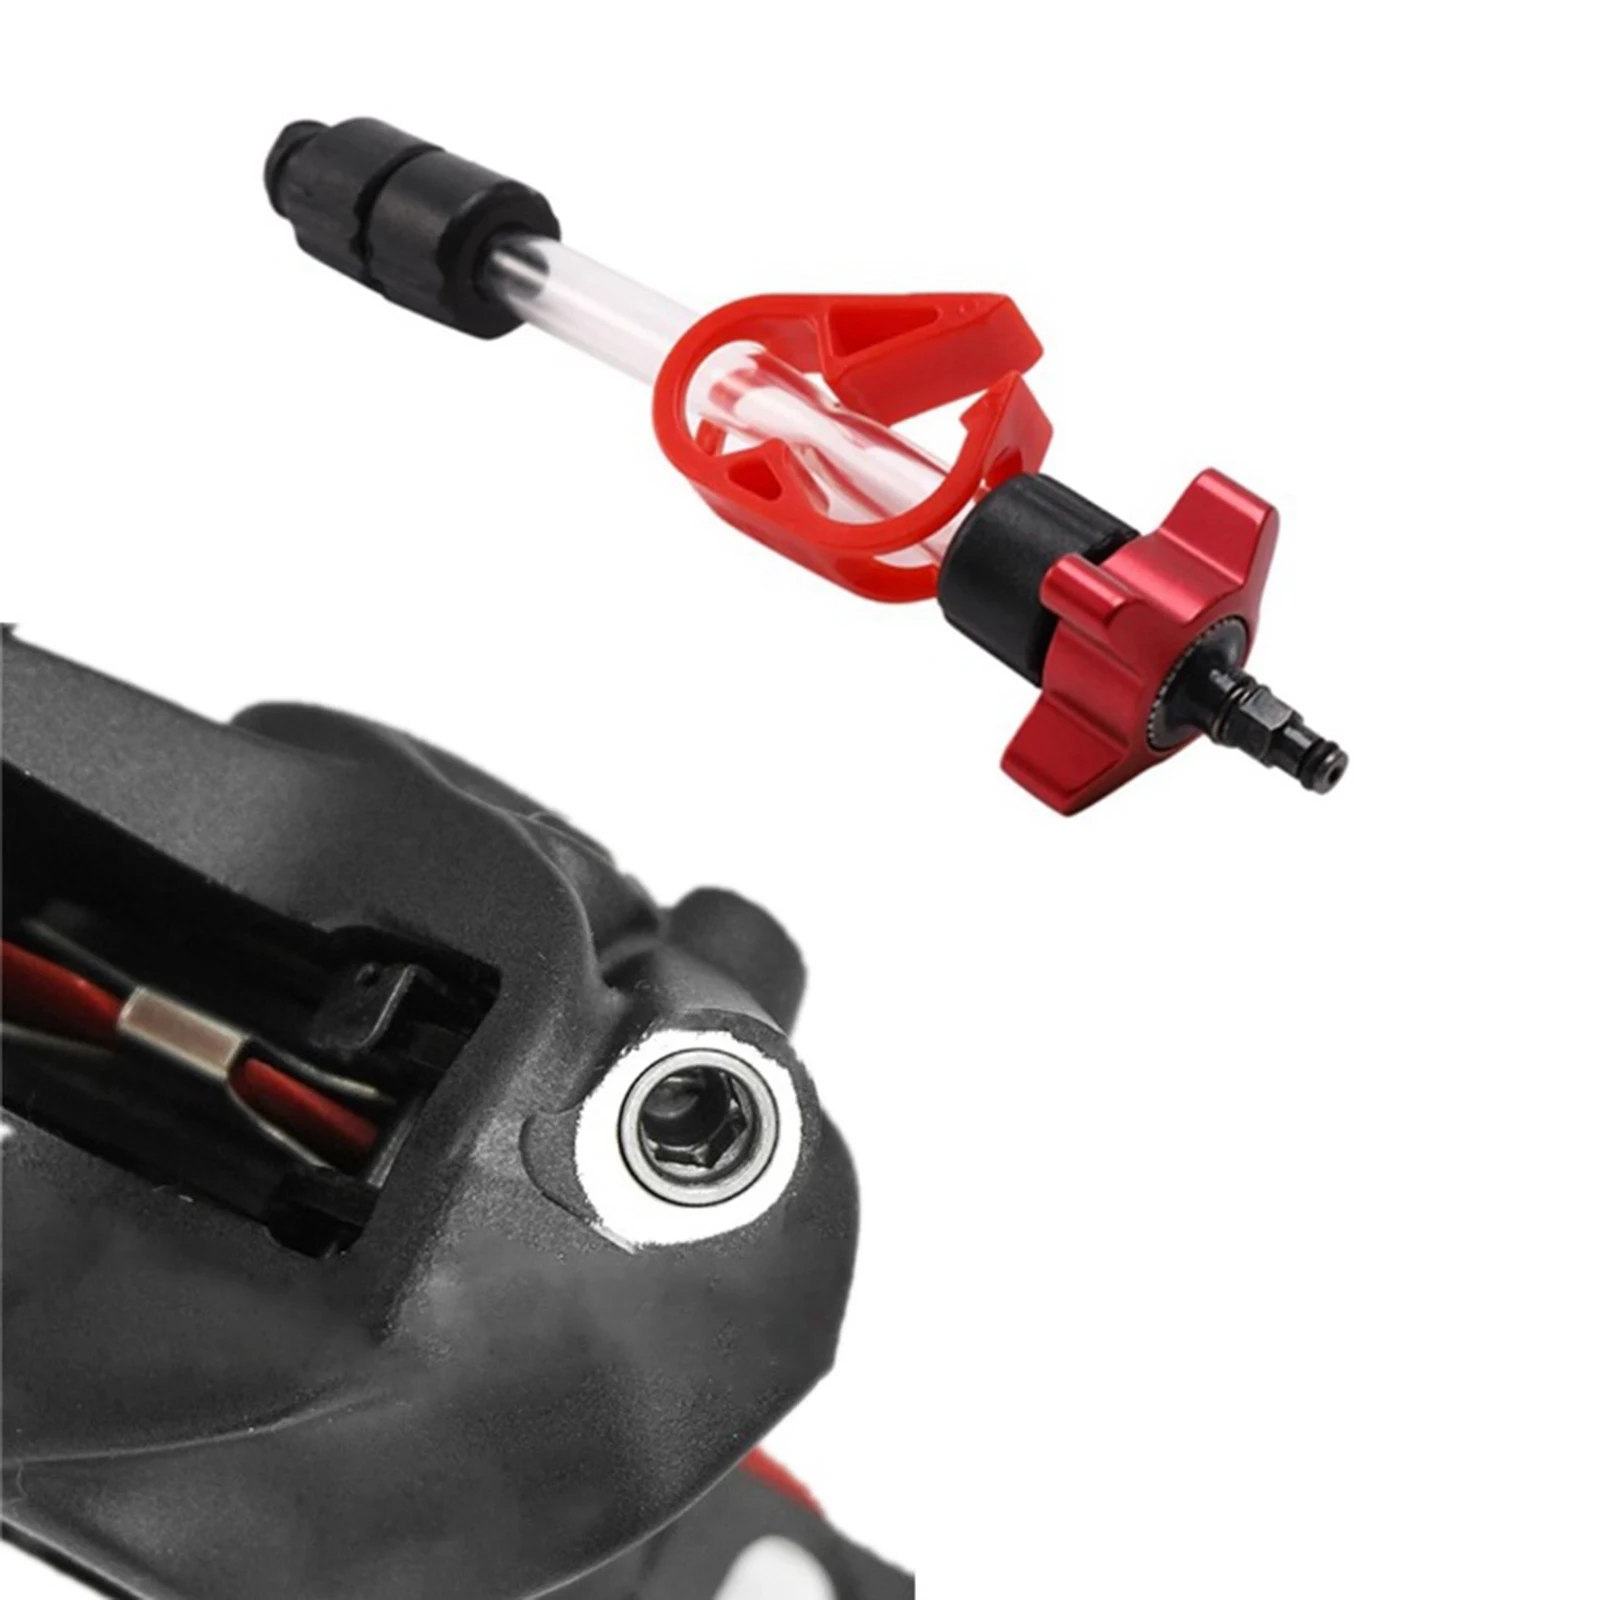  POINT Oil Bleed Kit Spare Parts  Hydraulic Disc Brake Bleeding Tools Fitting Adapter for Edge Fit Promax